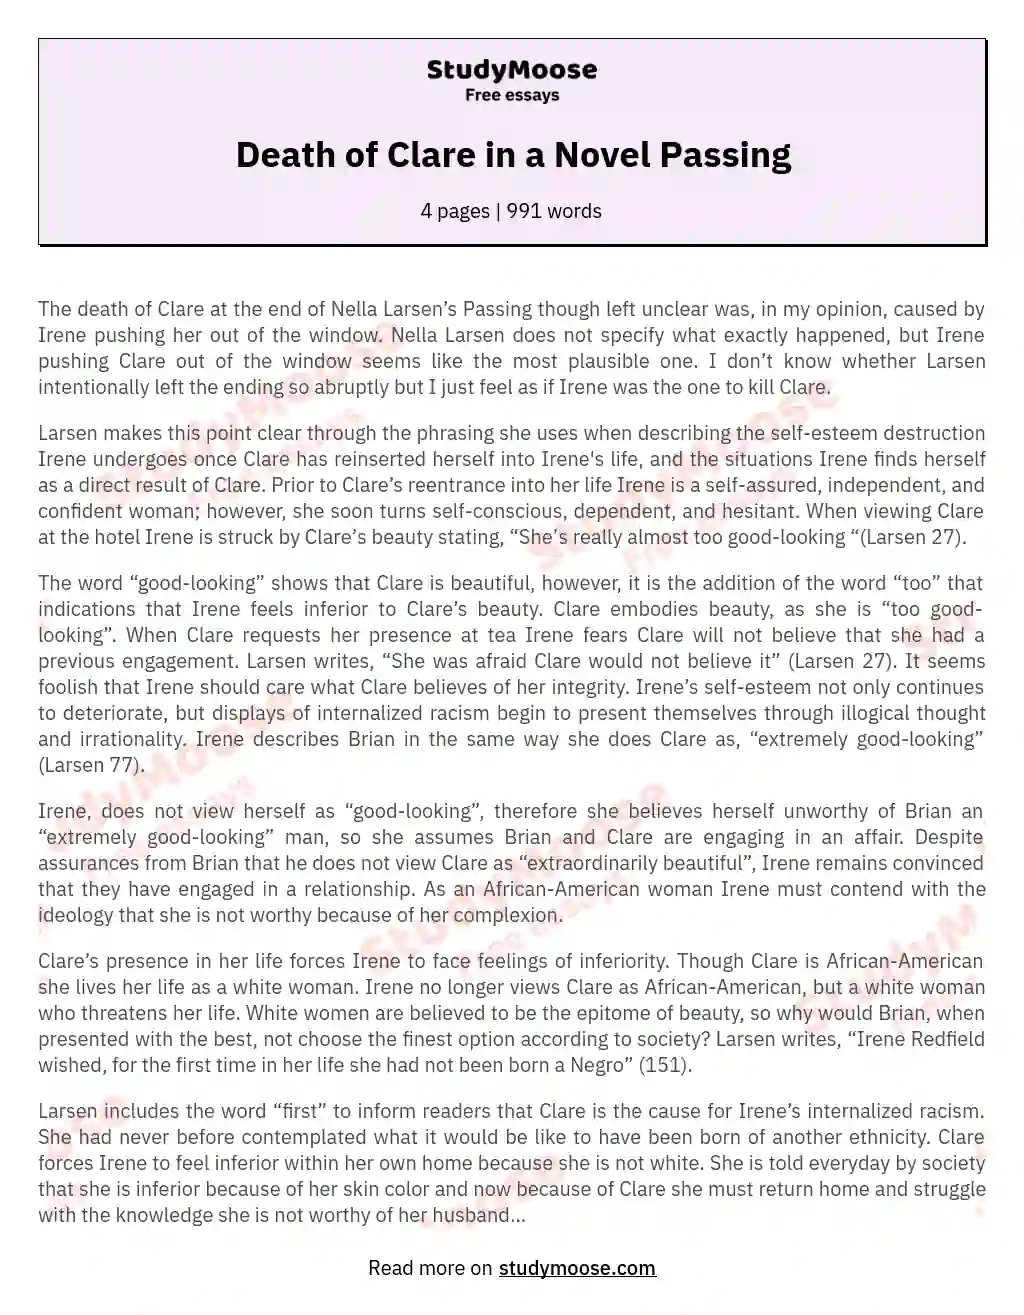 Death of Clare in a Novel Passing